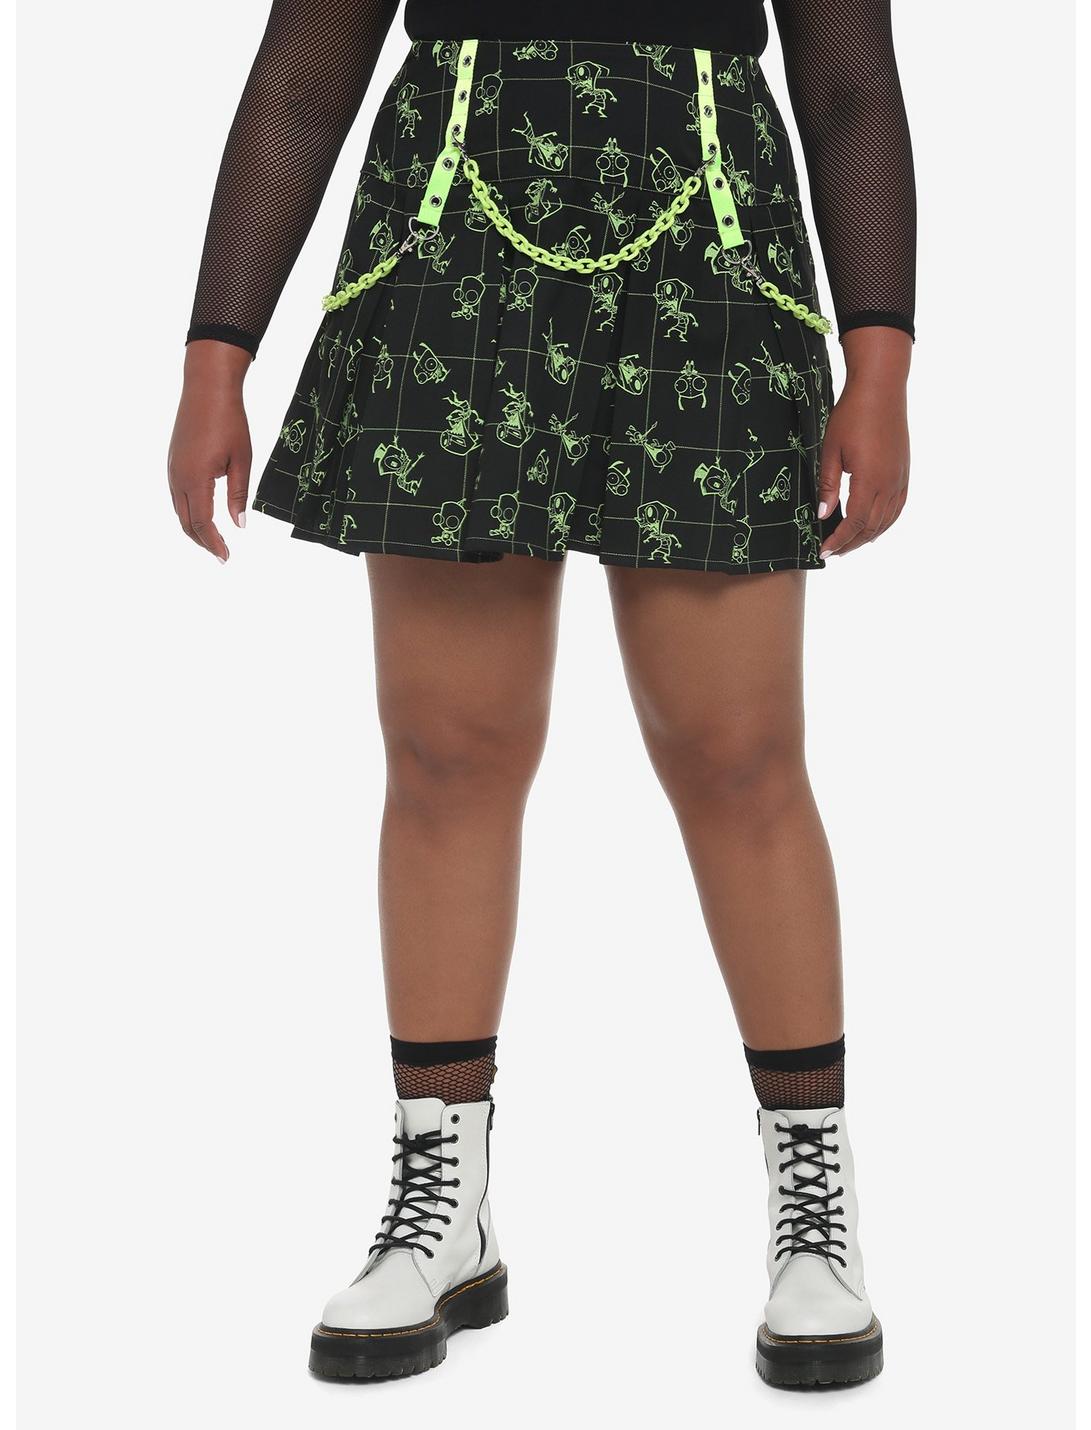 Invader Zim Chain Grid Pleated Skirt Plus Size, MULTI, hi-res